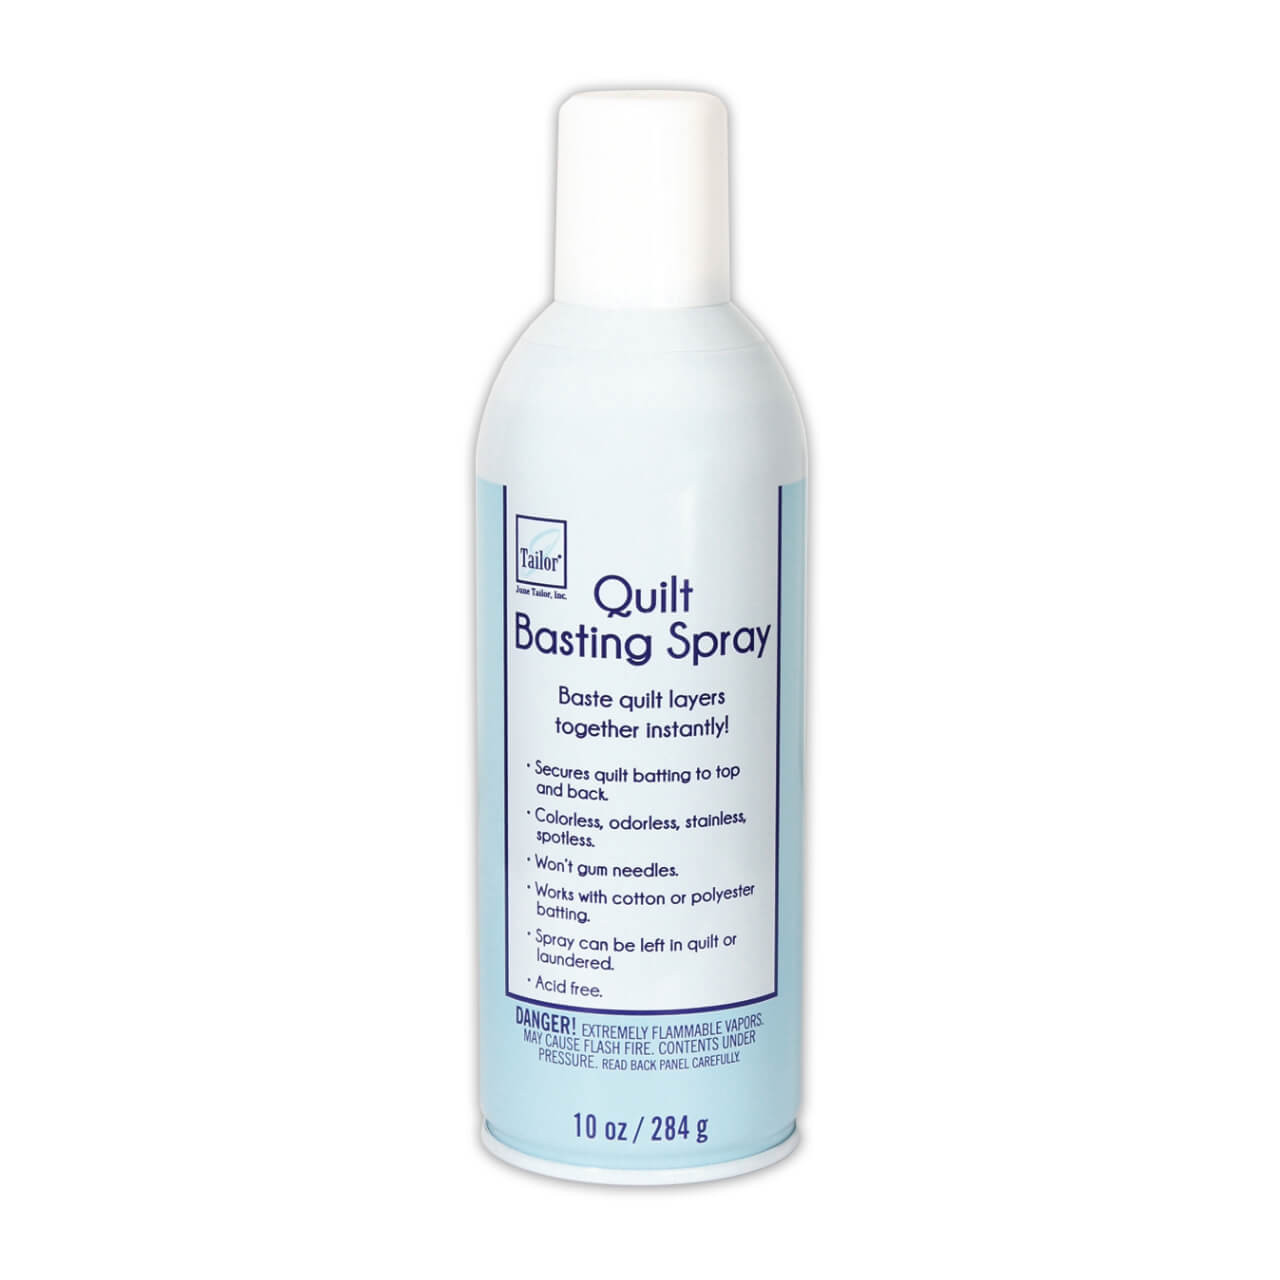 The image shows a 10-ounce bottle of June Tailor Quilt Basting Spray. The label indicates that it instantly secures quilt layers, is colorless, odorless, stainless, spotless, won't gum needles, works with cotton or polyester batting, and that the spray can be left in quilt or laundered. It also notes the product is acid-free and provides a warning about the flammability of the contents.